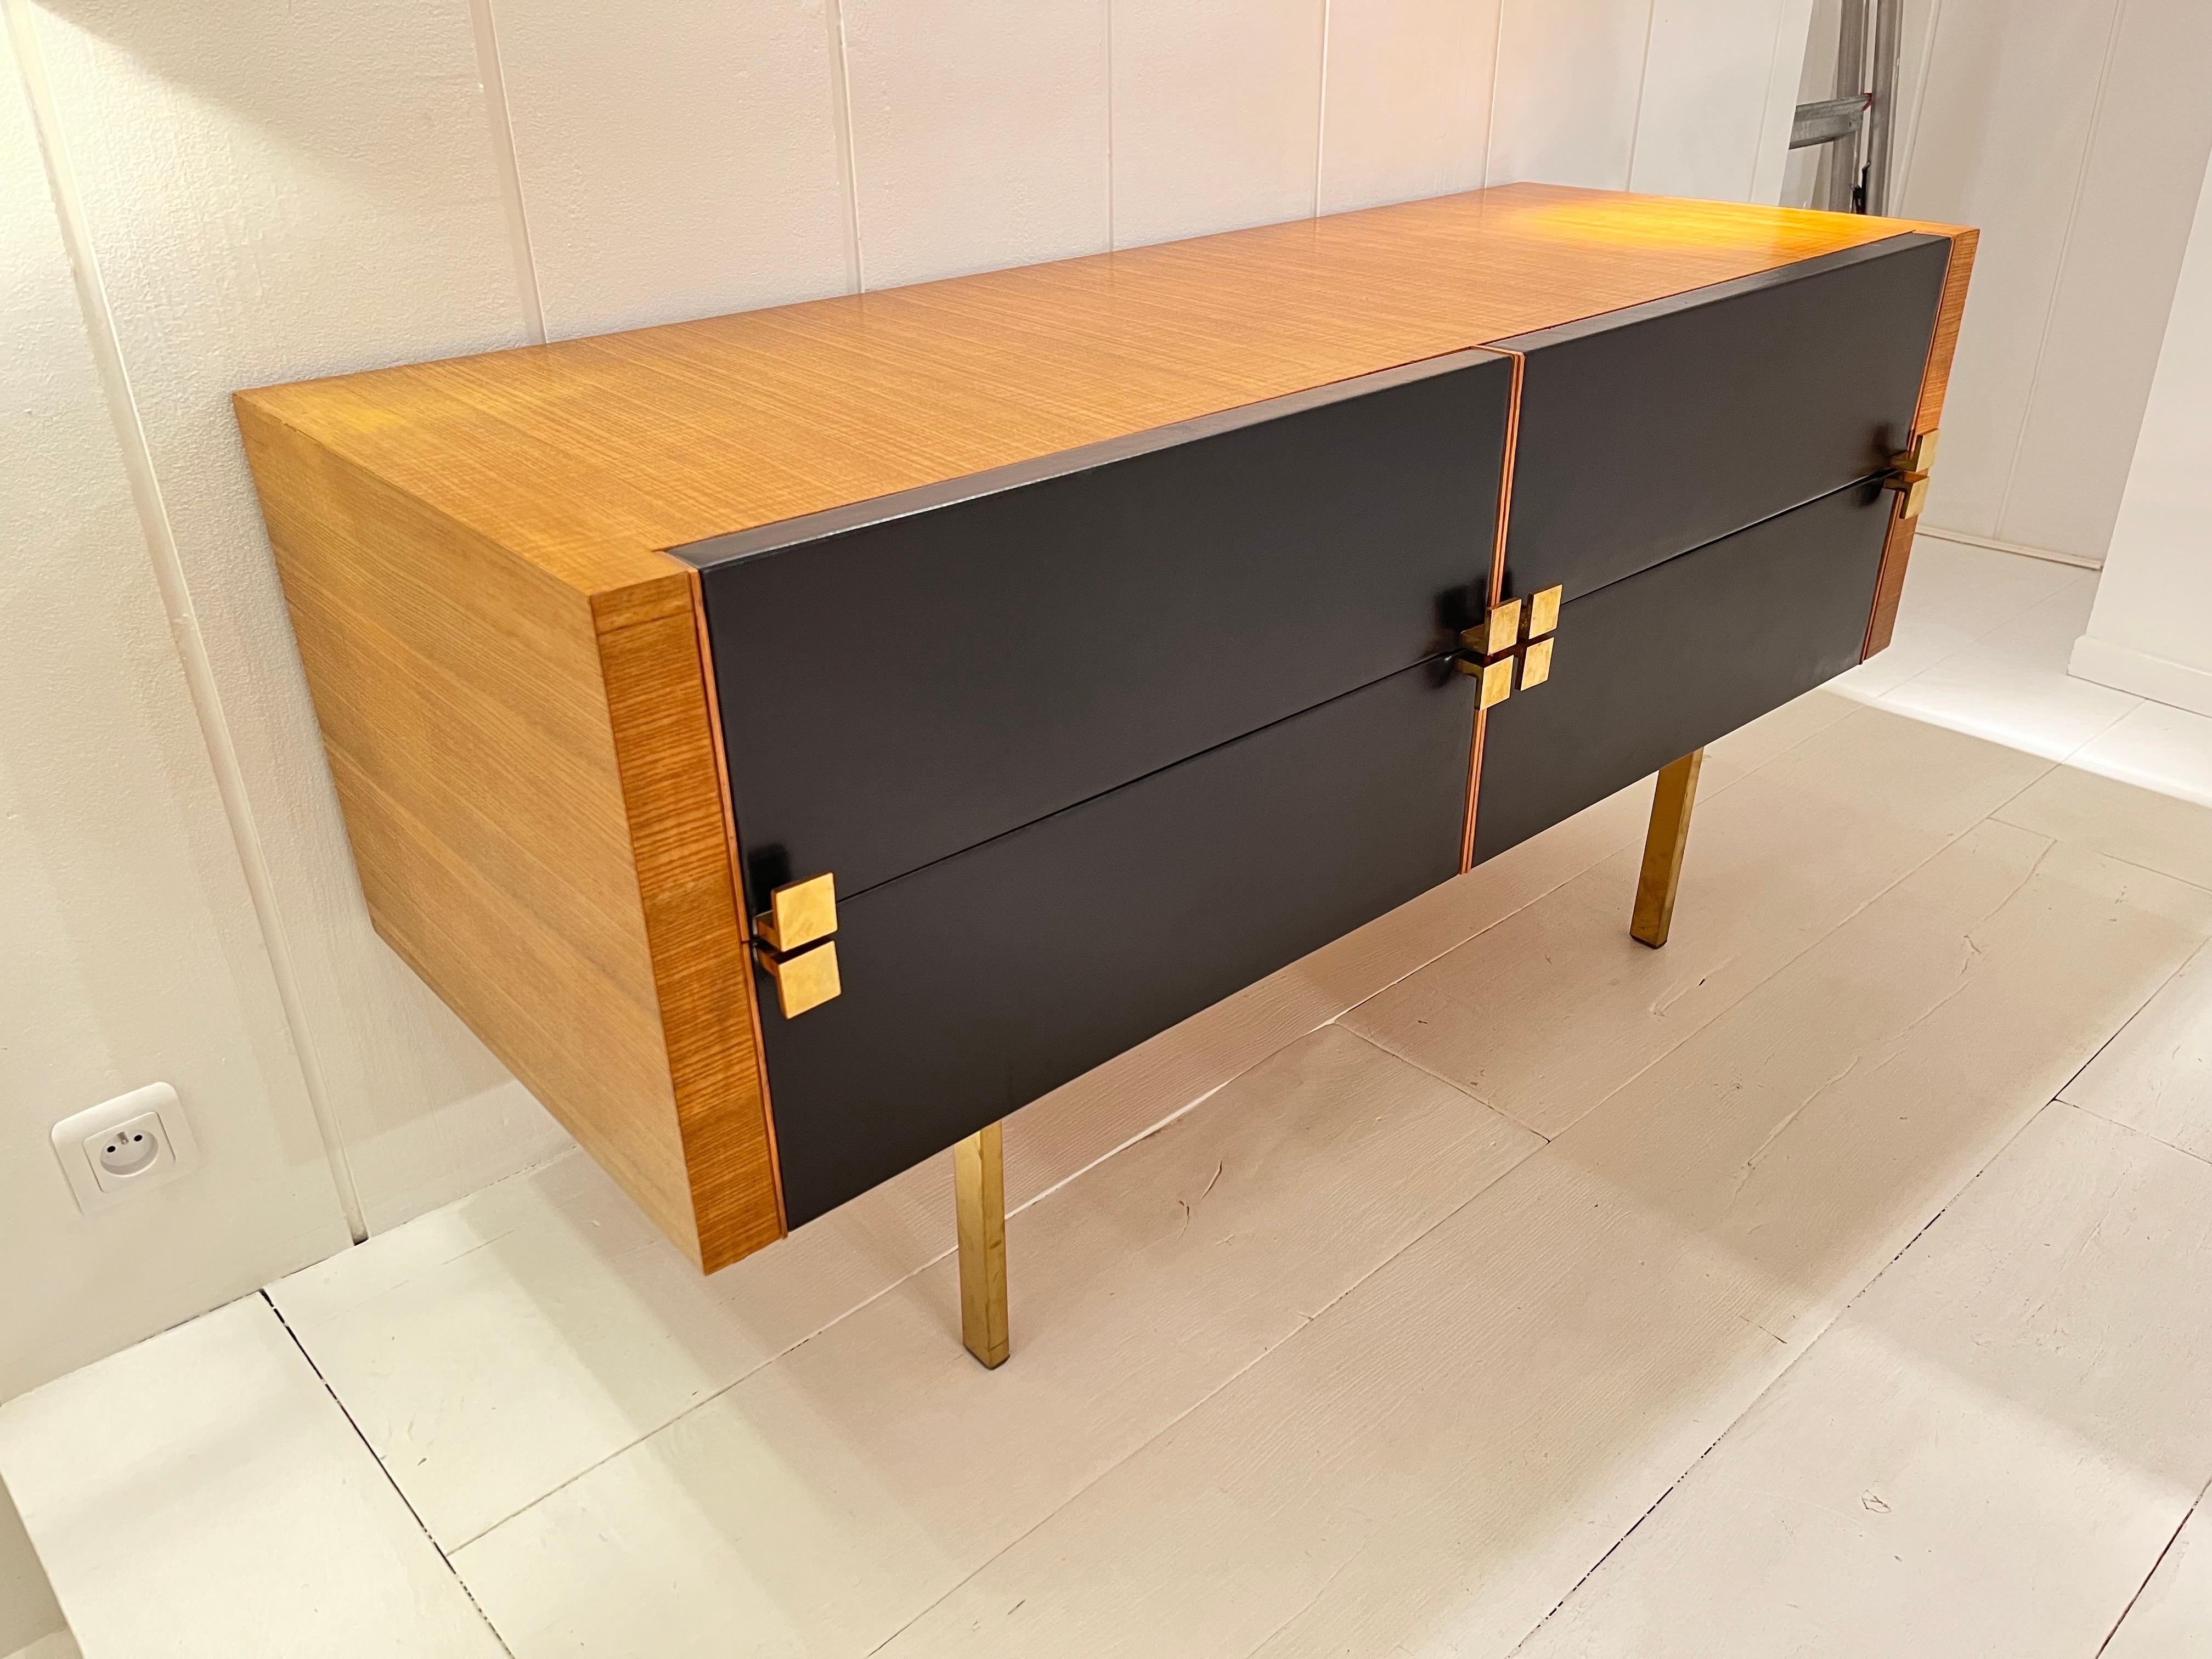 1960s Ashwood chest with brass handles and and Black leathea drawers.
Designe by Roger Landault.
Great vintage condition.
 